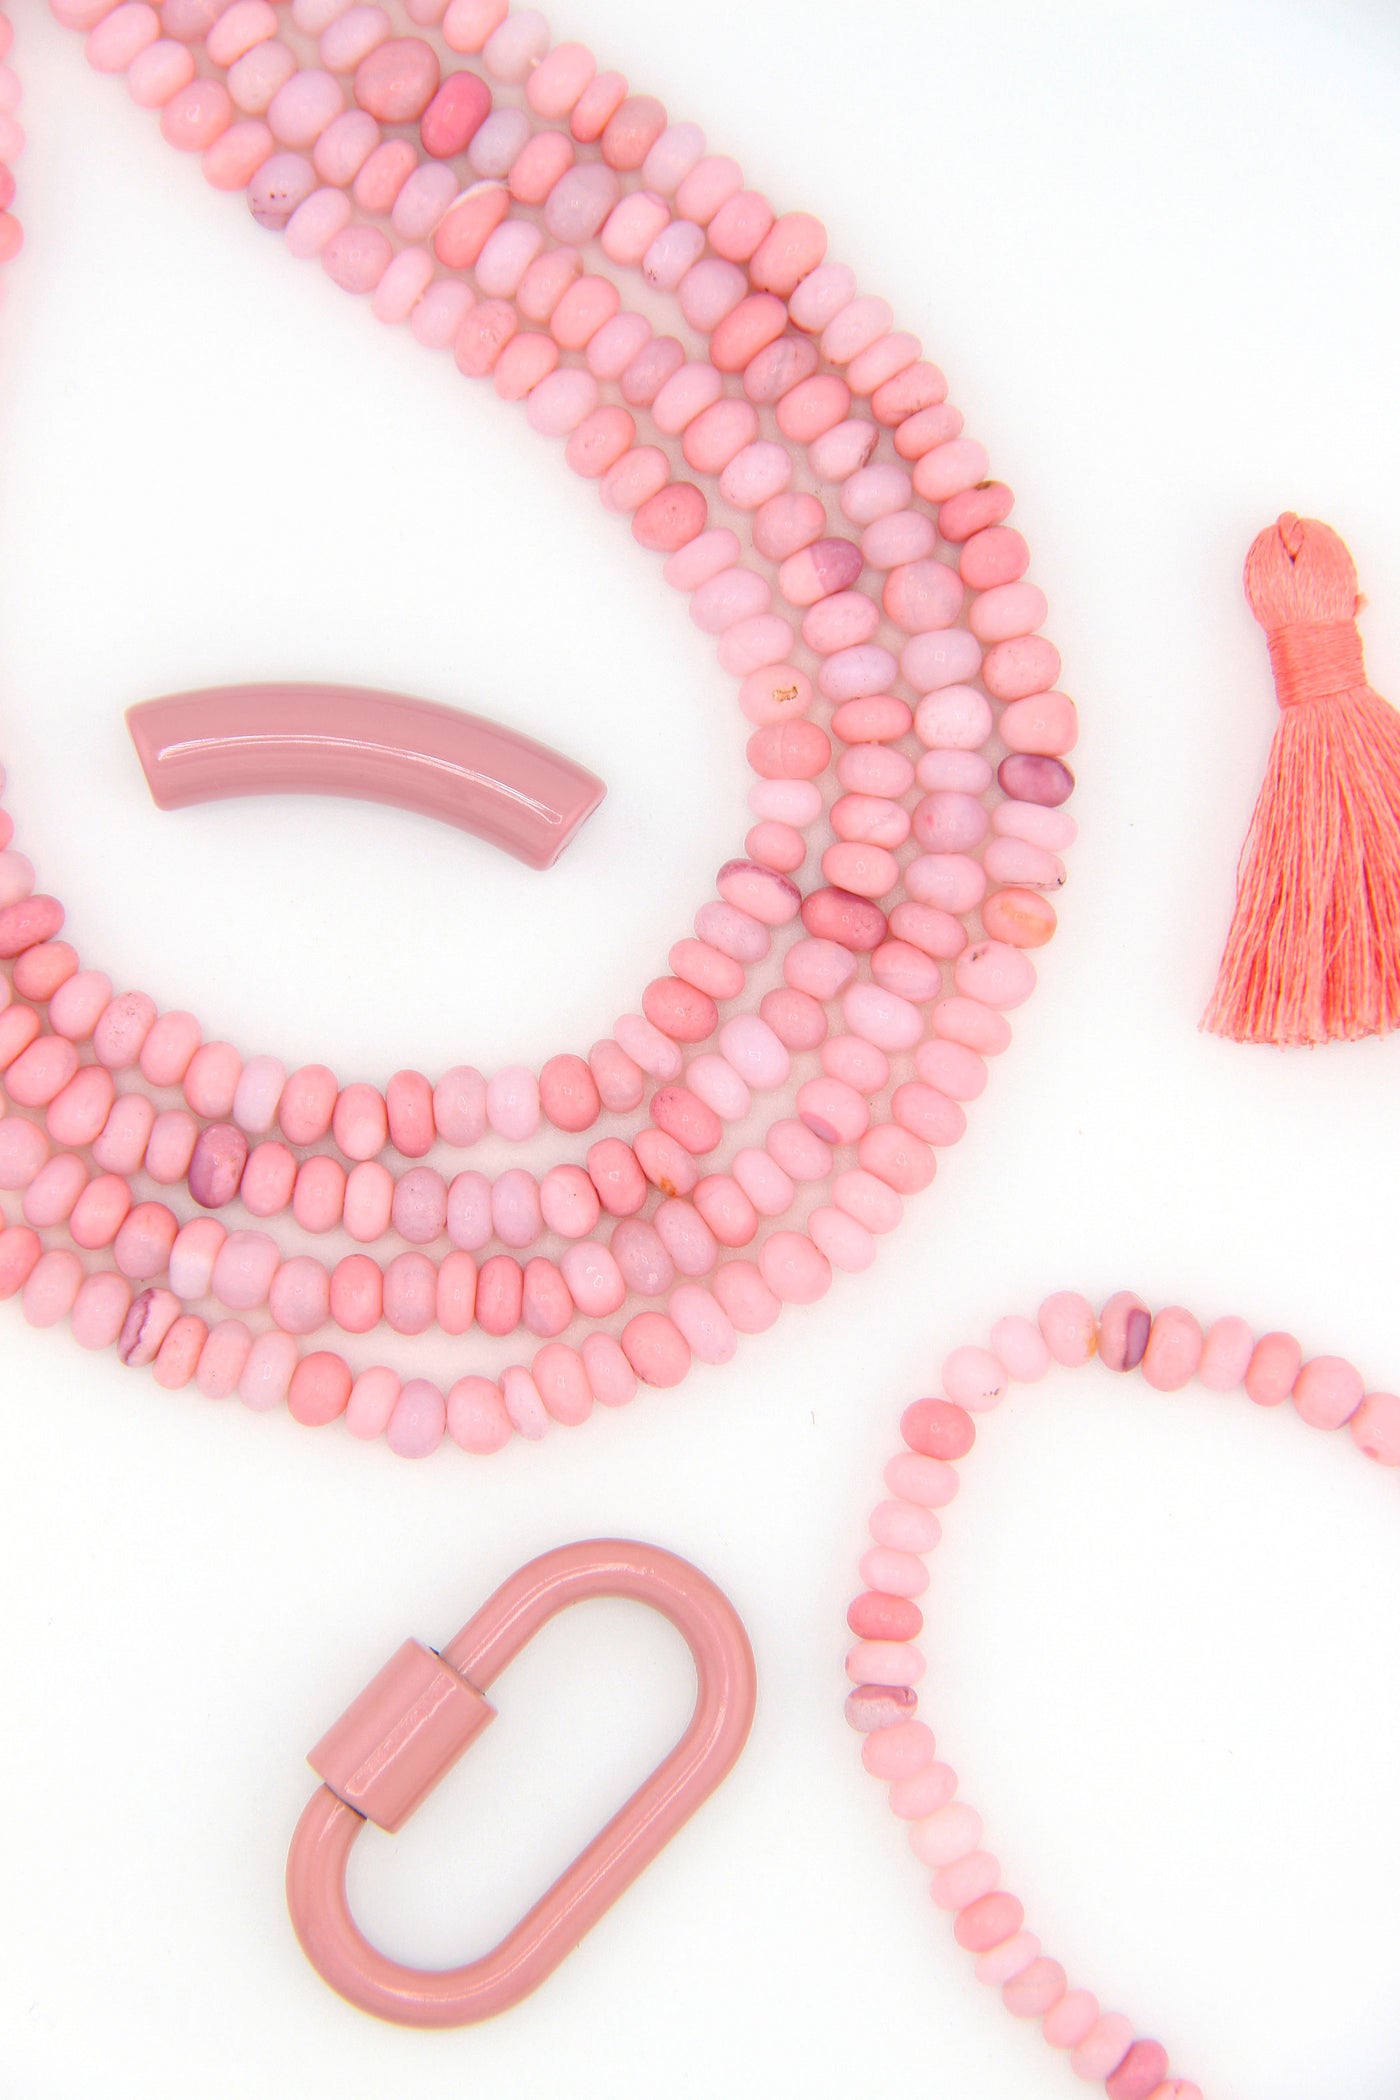 Pastel Flamingo Pink Opal Smooth Rondelle Beads, 5-6mm AA Quality AA Quality Beads for DIY bracelets